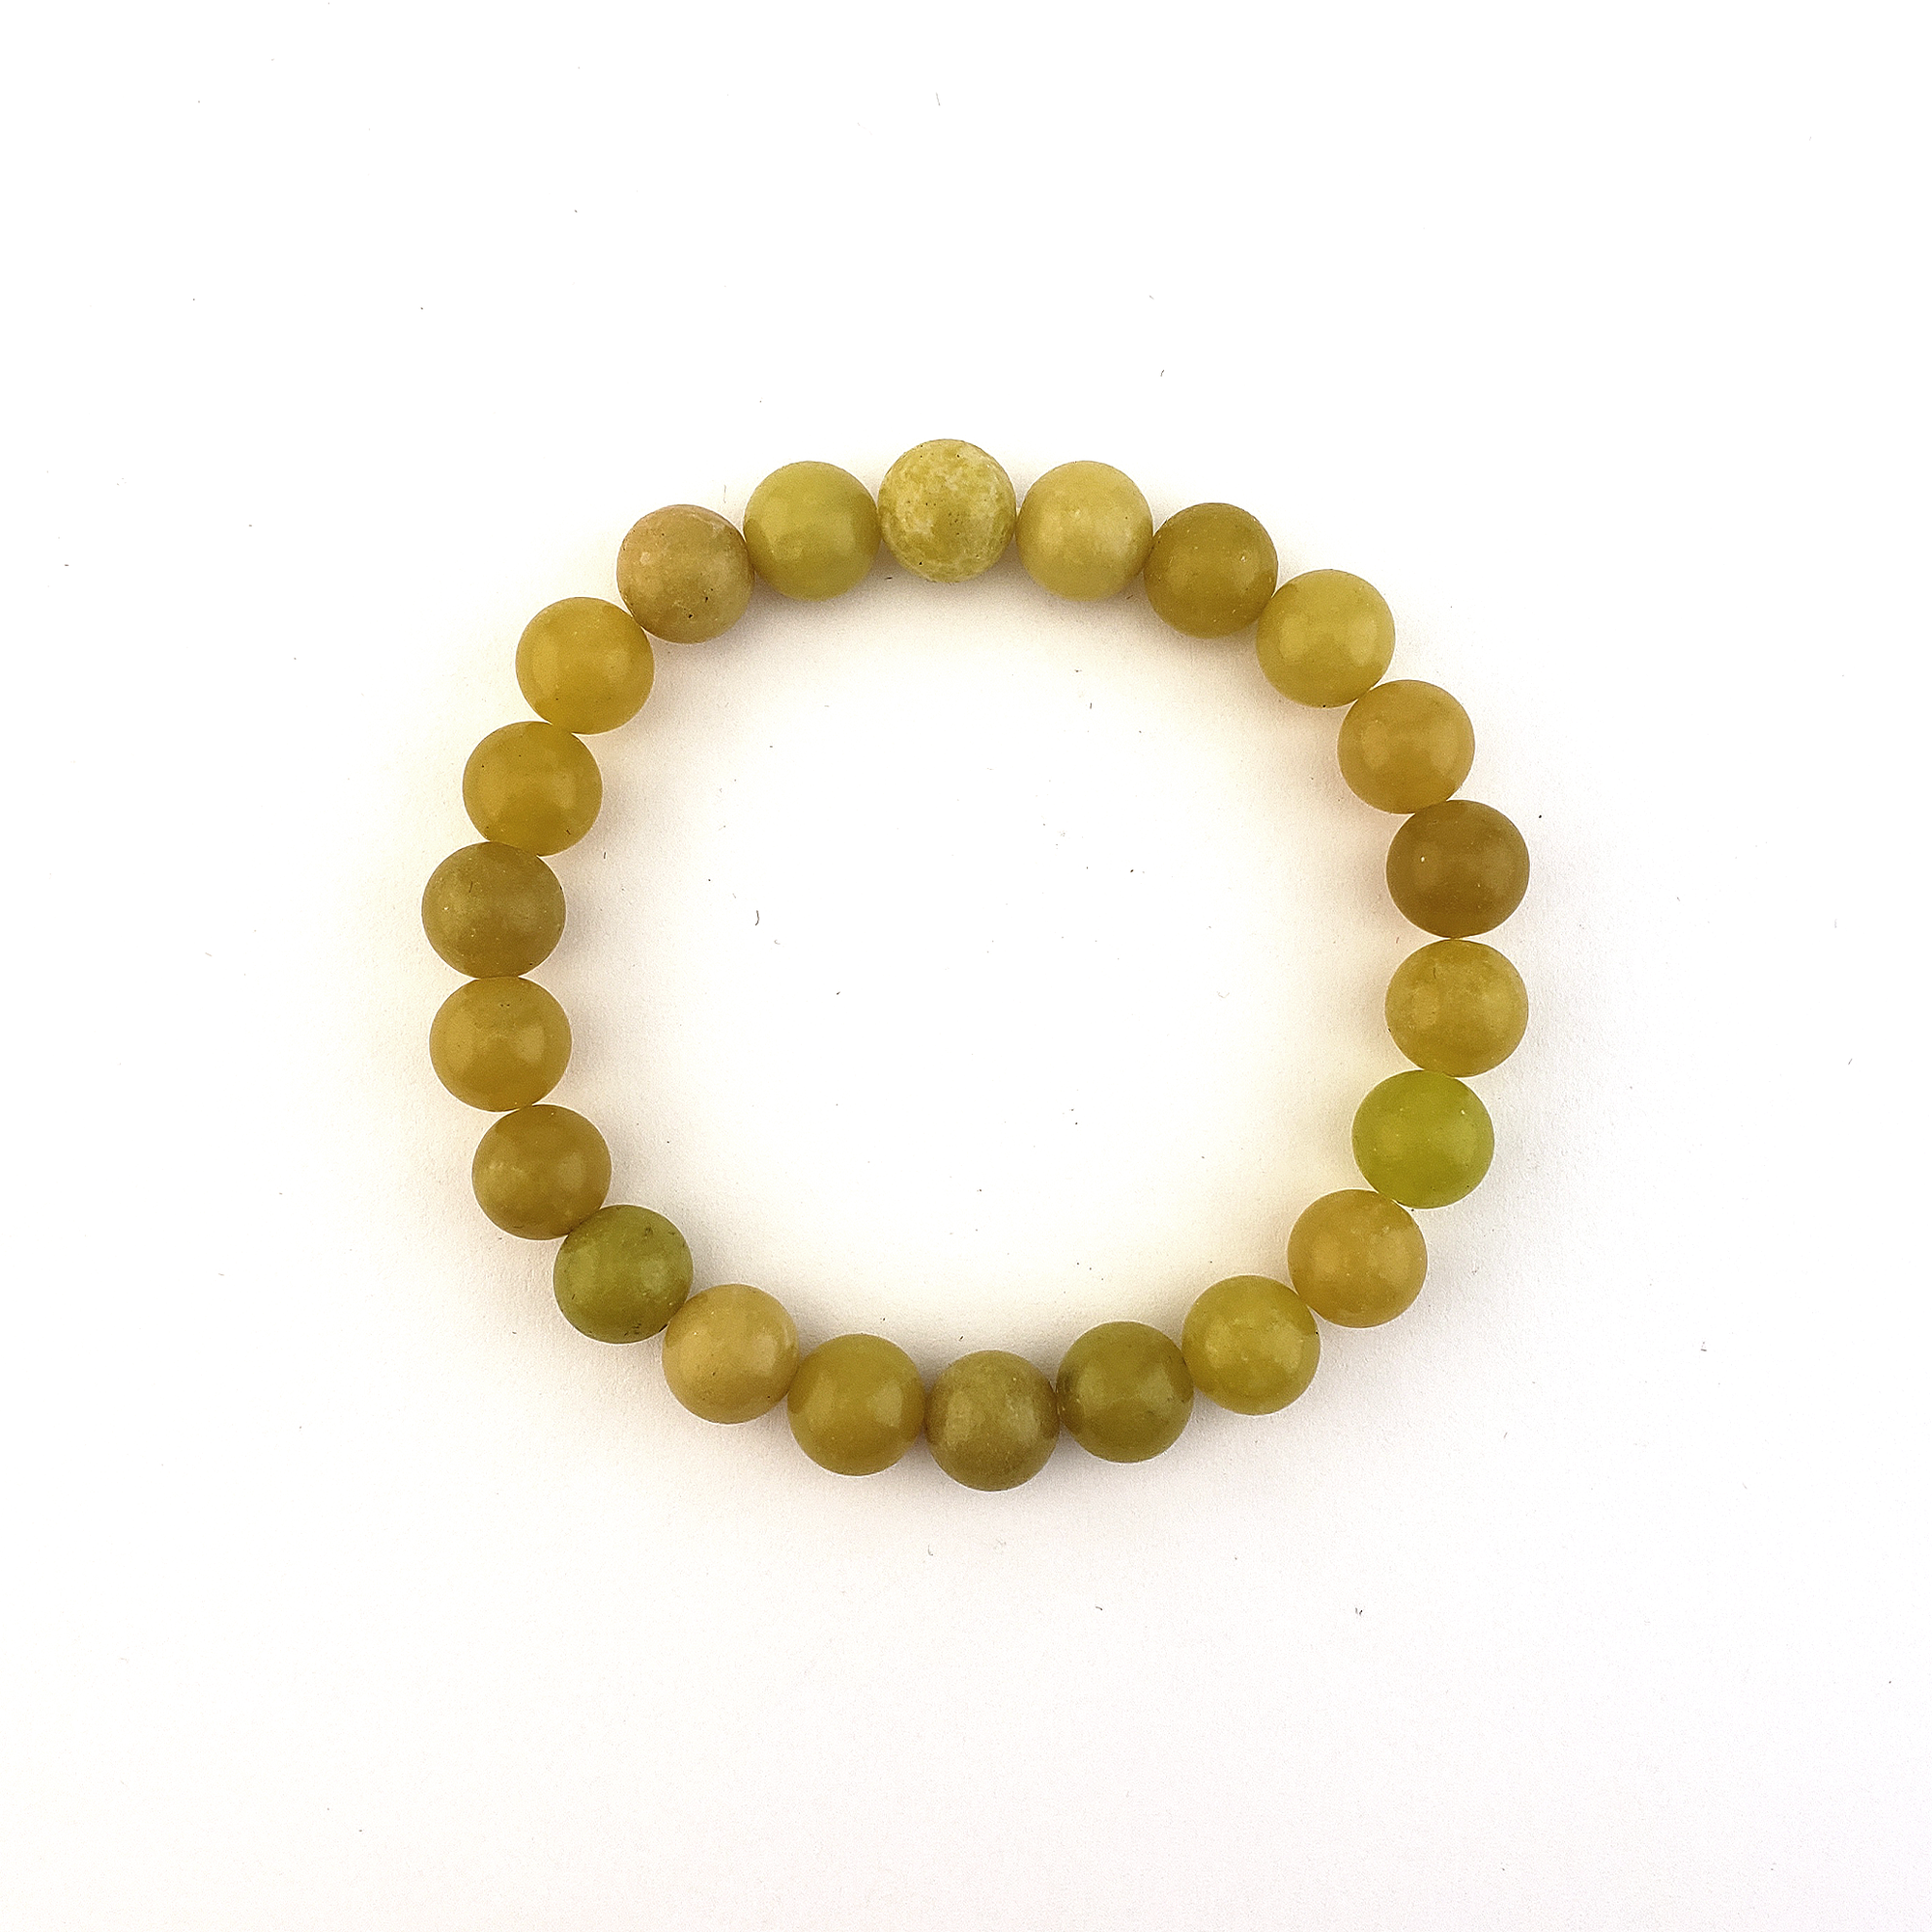 Yellow Serpentine Natural Crystal 7-8mm Bead Bracelet - One Serpentine Crystal Elastic Bracelet on White Background